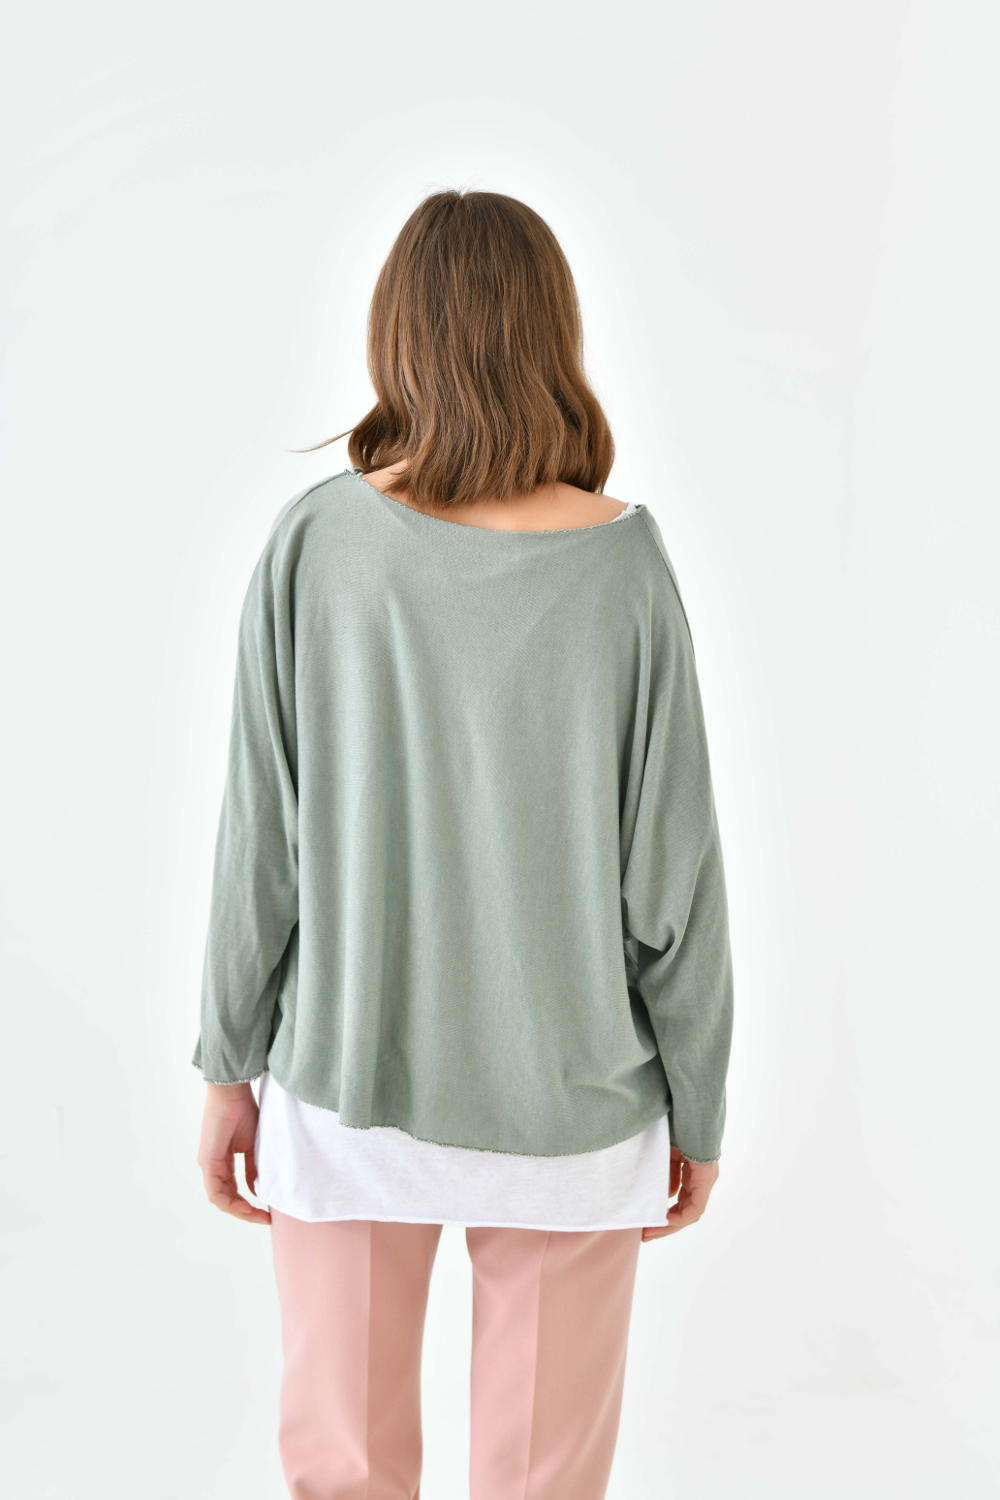 Oversized Long Sleeve Layered Blouse With Necklace In Green And White 0172BLOUSEGREENNECKLACE